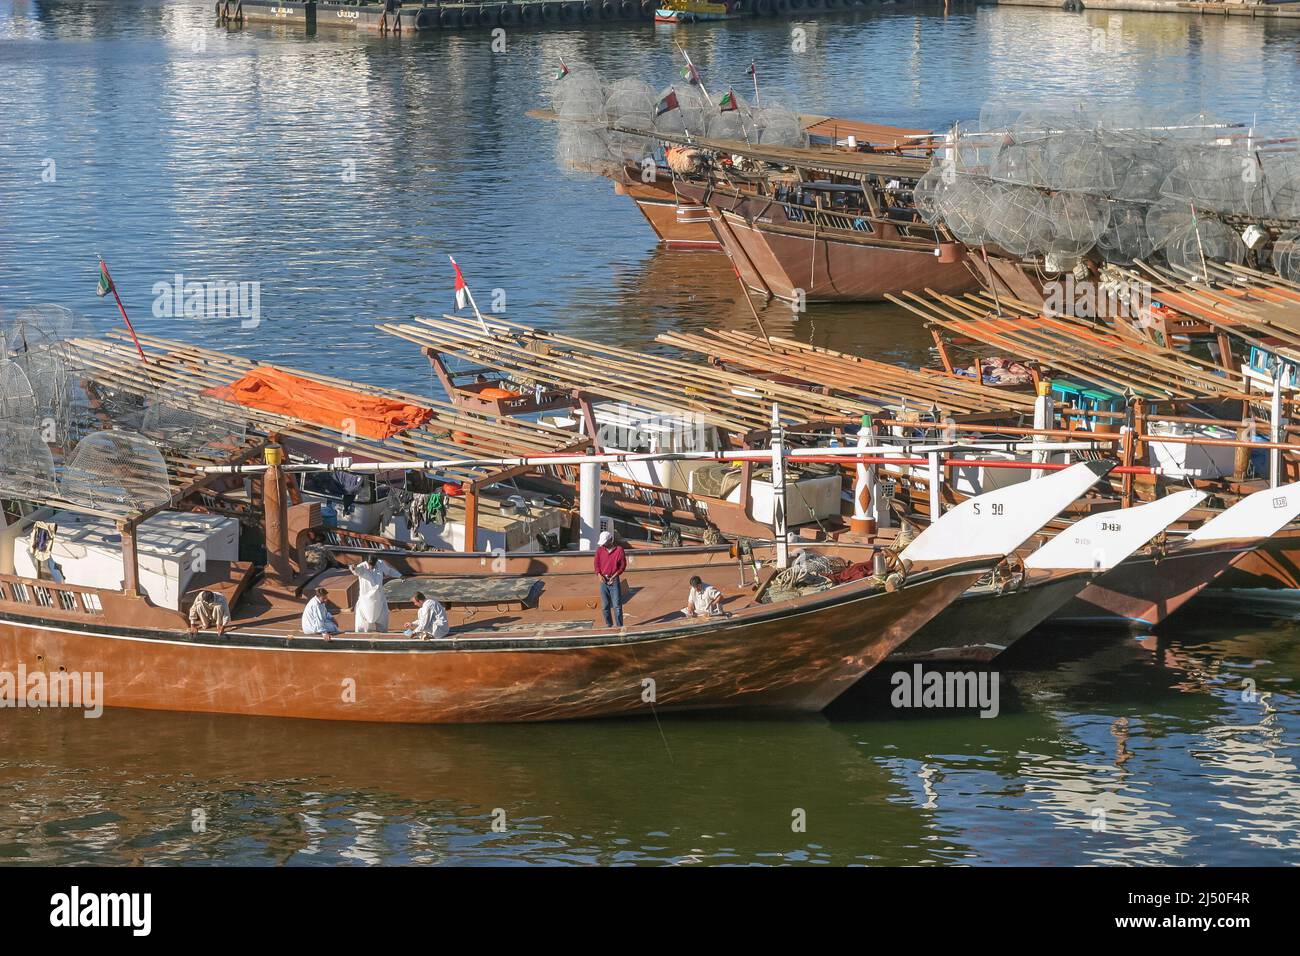 The crew of a traditional fishing dhow, laden with gargours or fish traps, fishing near Sharjah Bridge in Sharjah in the United Arab Emirates. Stock Photo